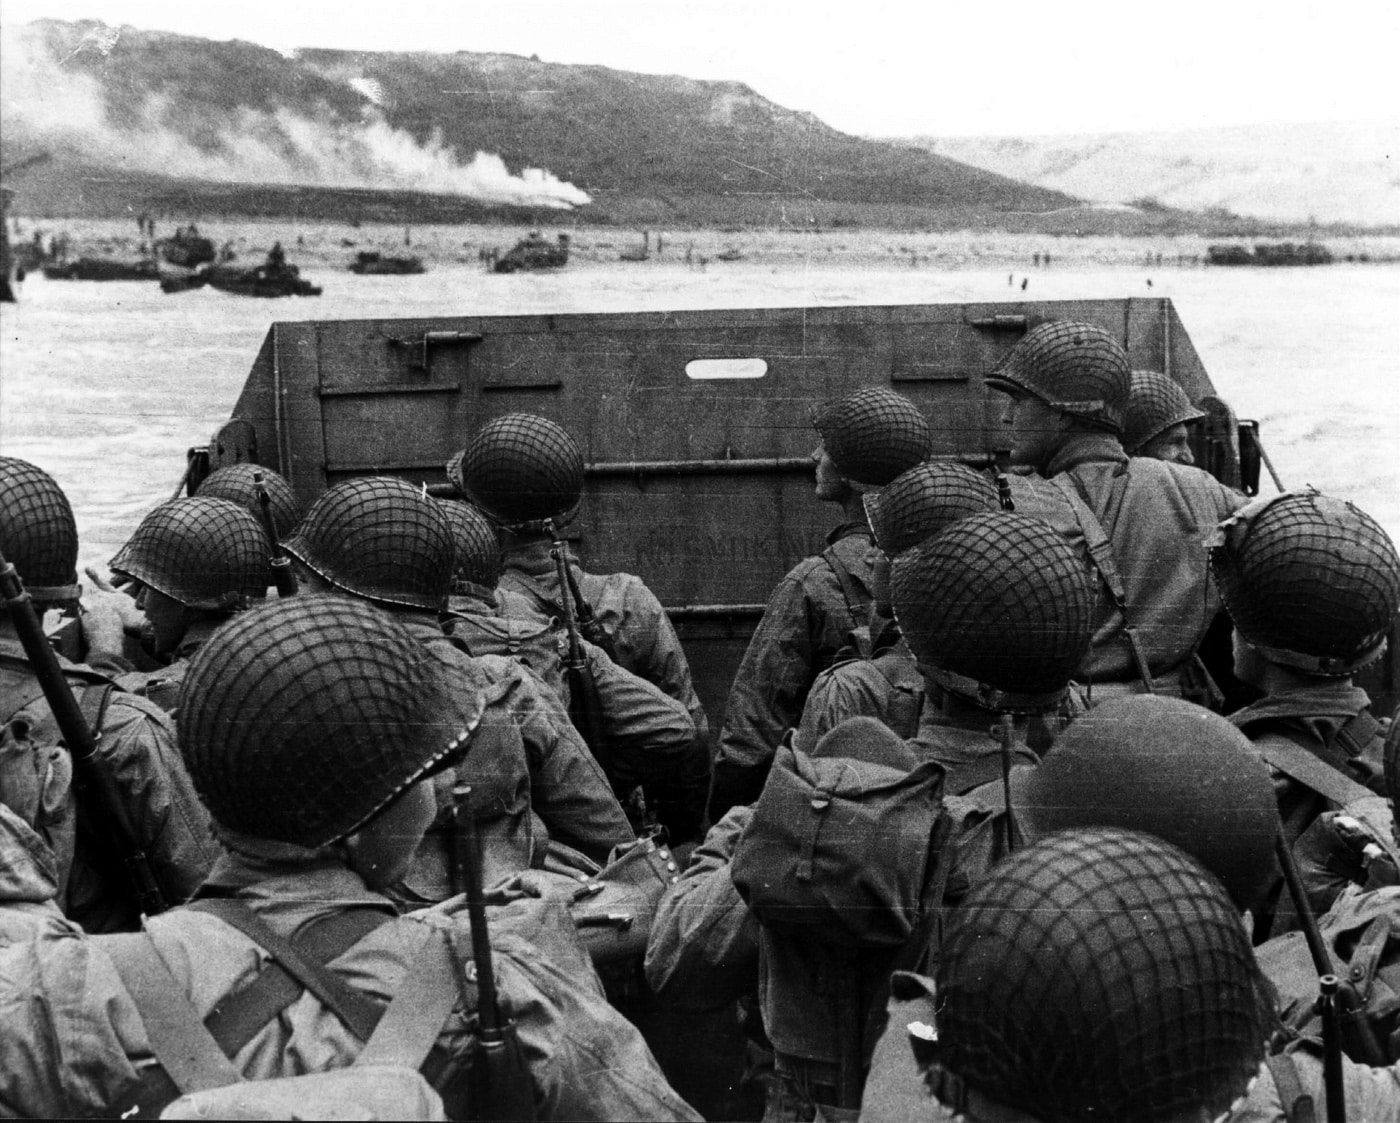 Here we see American troops on landing craft making their way to the beach on D-Day.